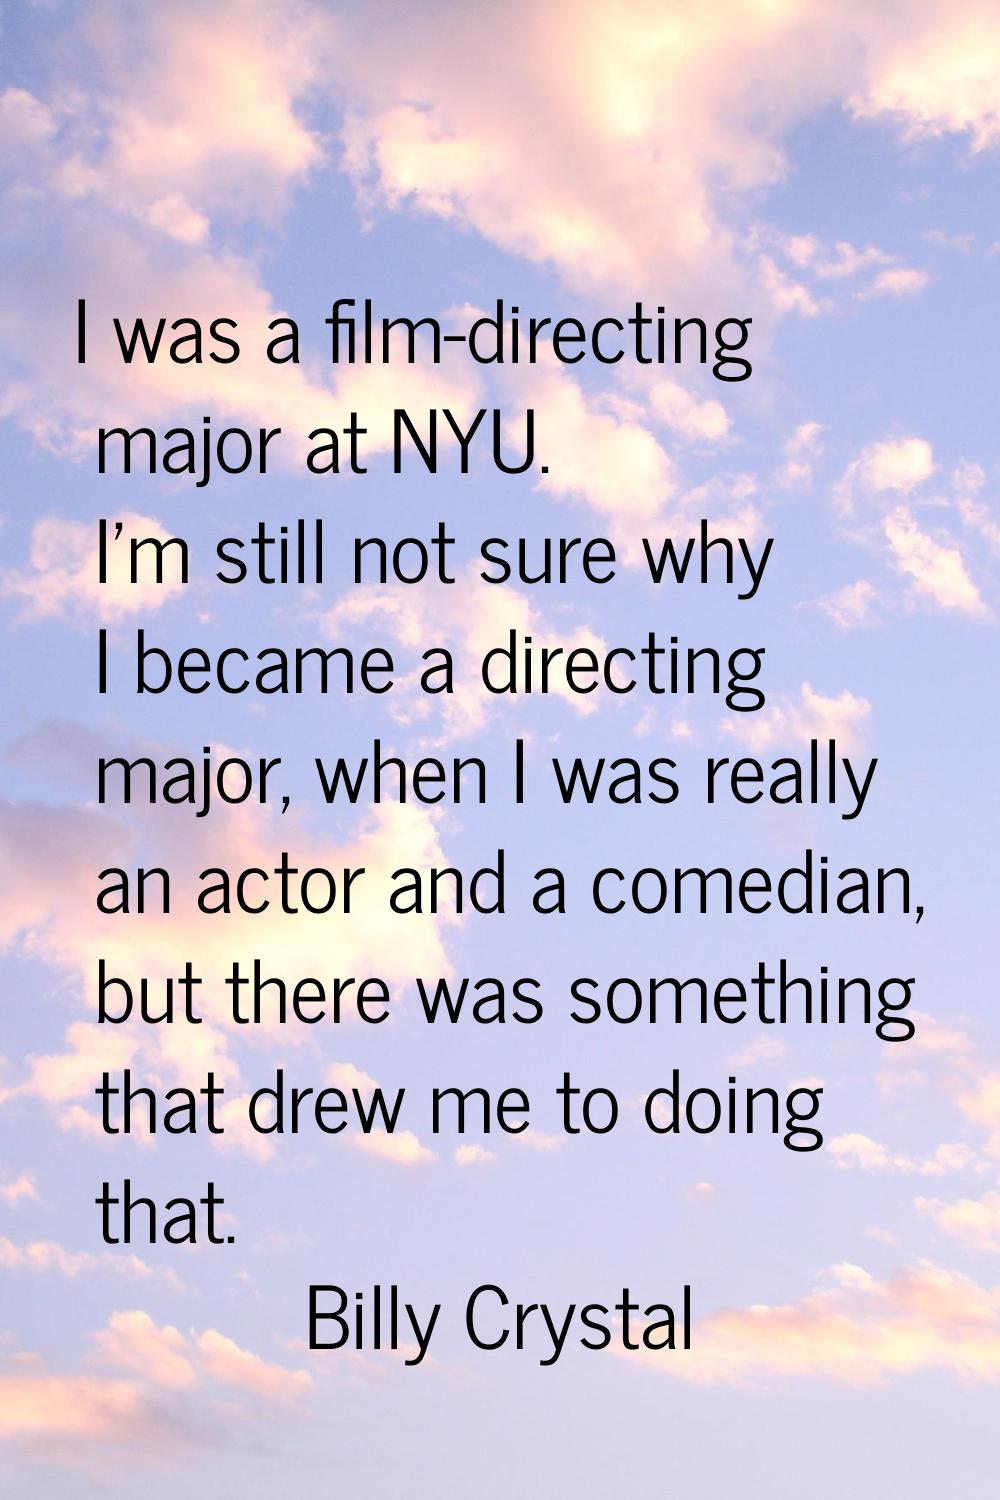 I was a film-directing major at NYU. I'm still not sure why I became a directing major, when I was 